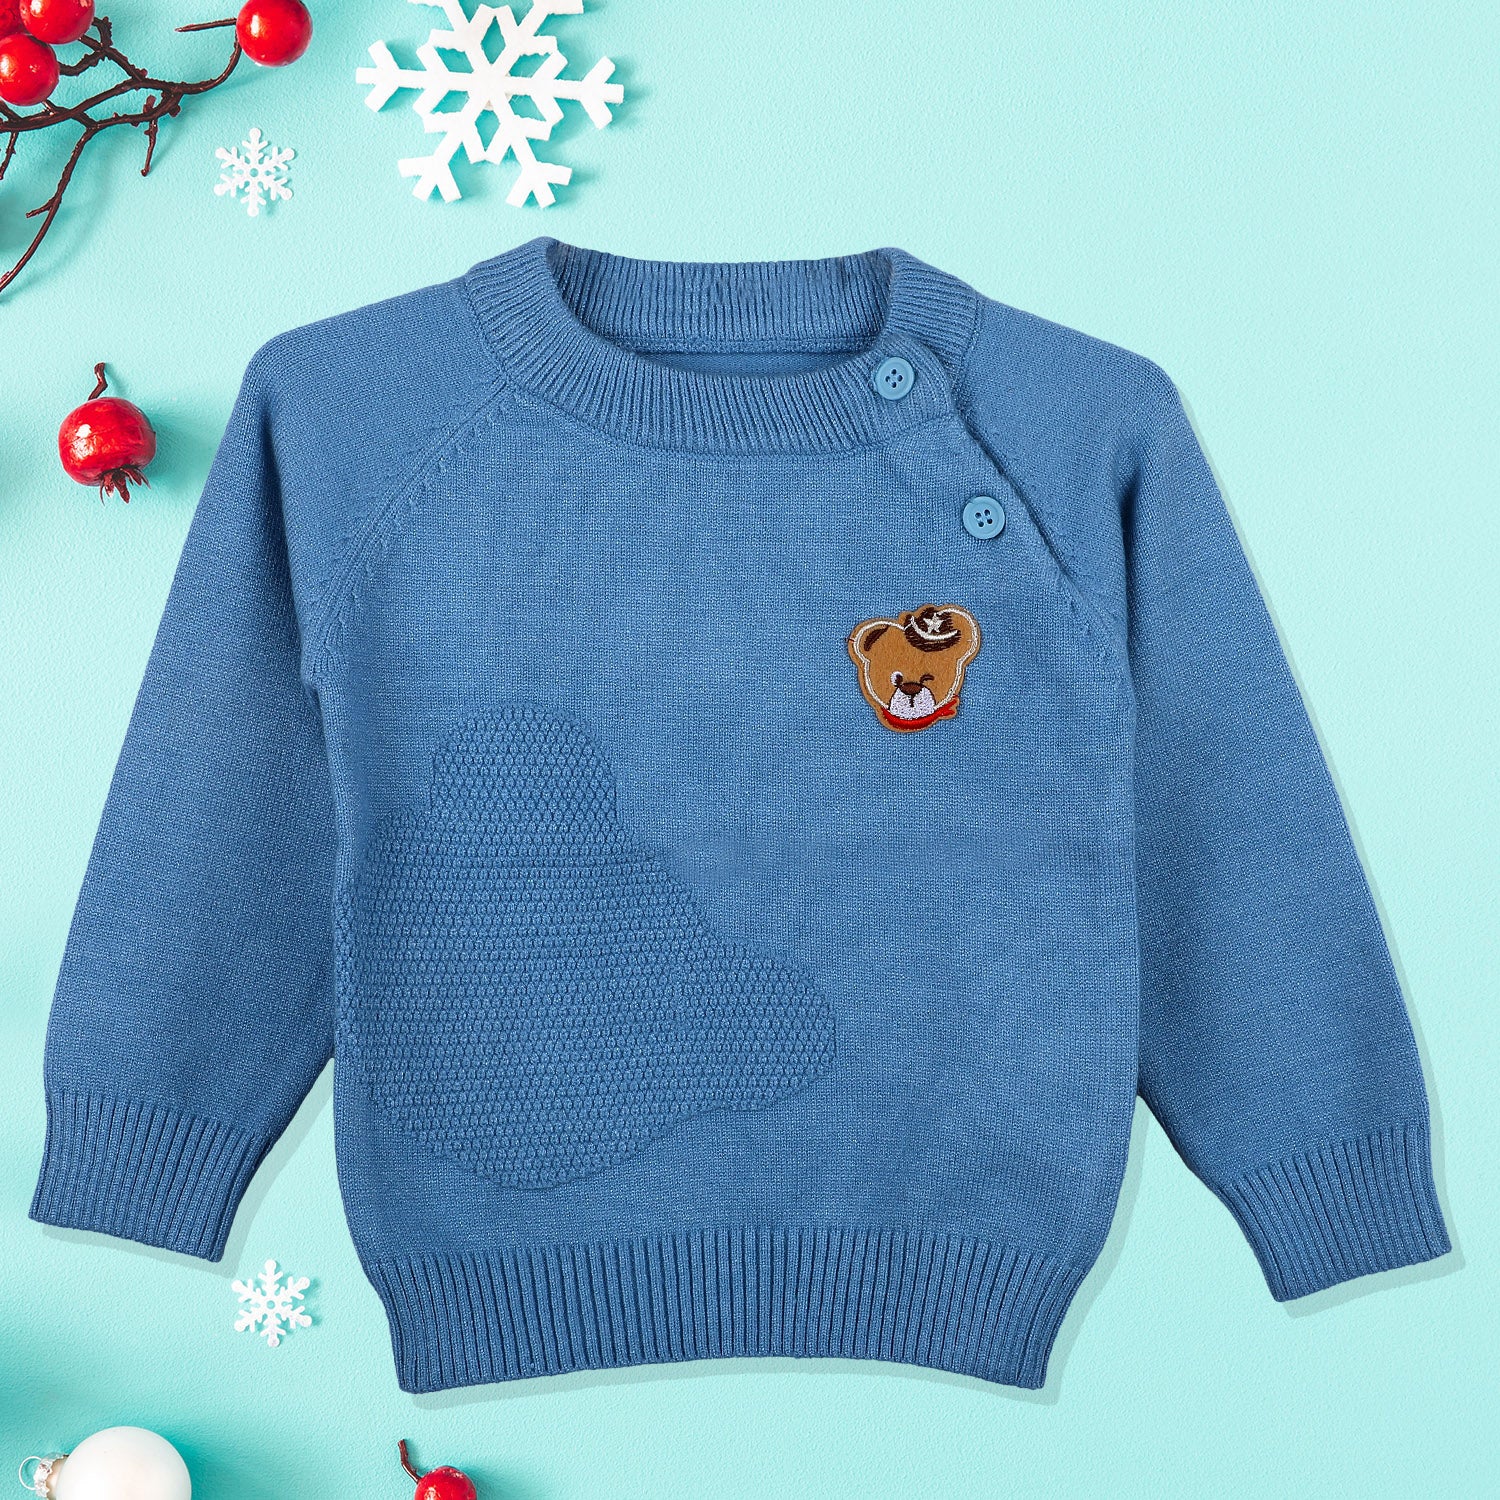 Bear Embroidery Premium Full Sleeves Knitted Sweater - Blue